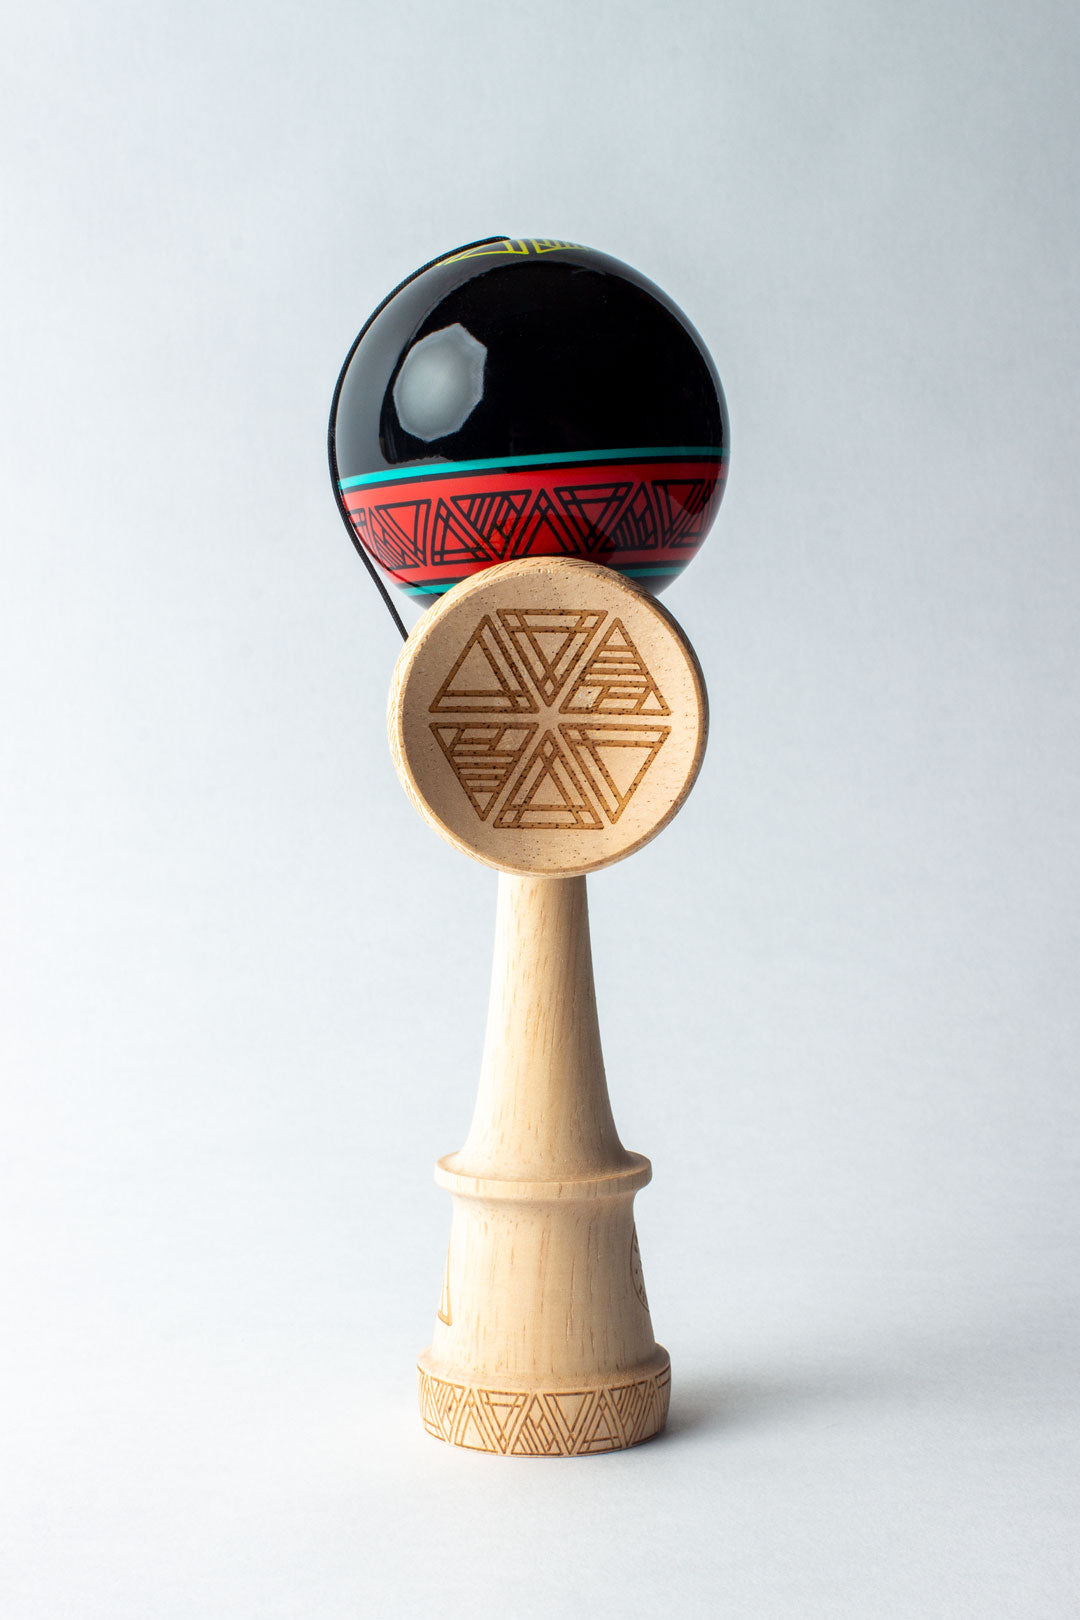 FINDLAY HATS x SWEETS - AMPED Kendama - RED